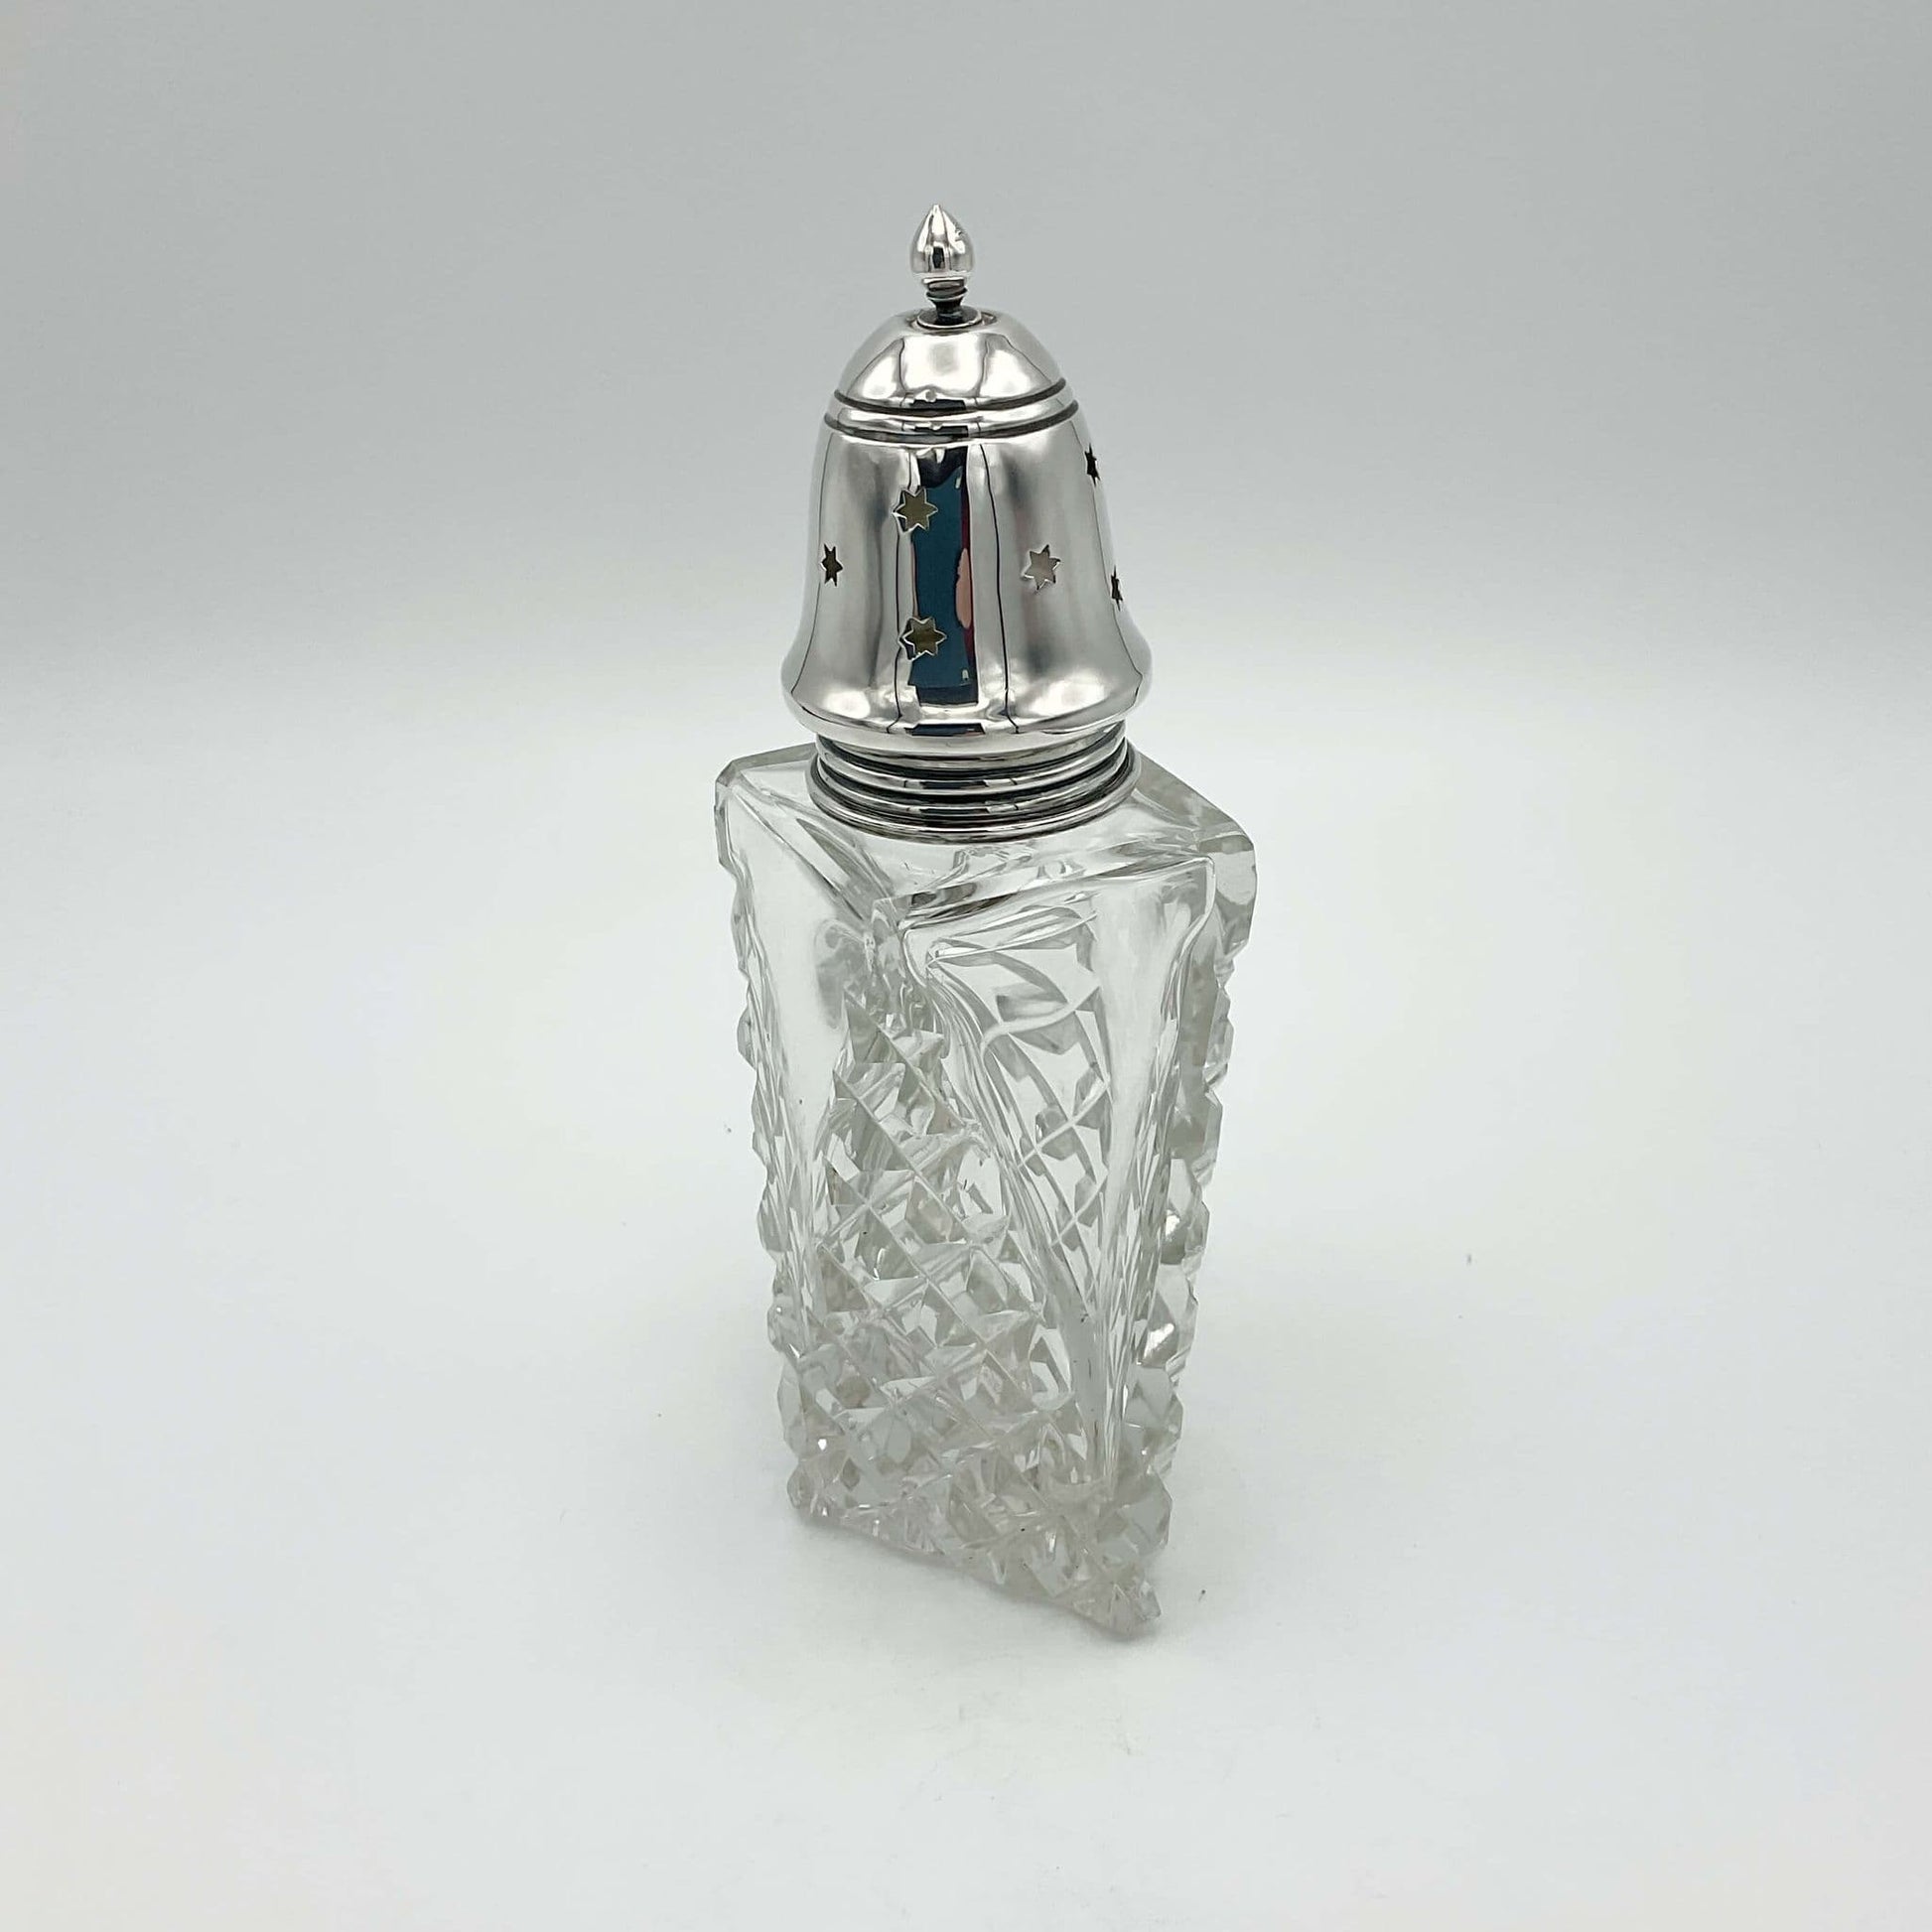 side view of diamond shaped Crystal glass and silver topped sugar shaker